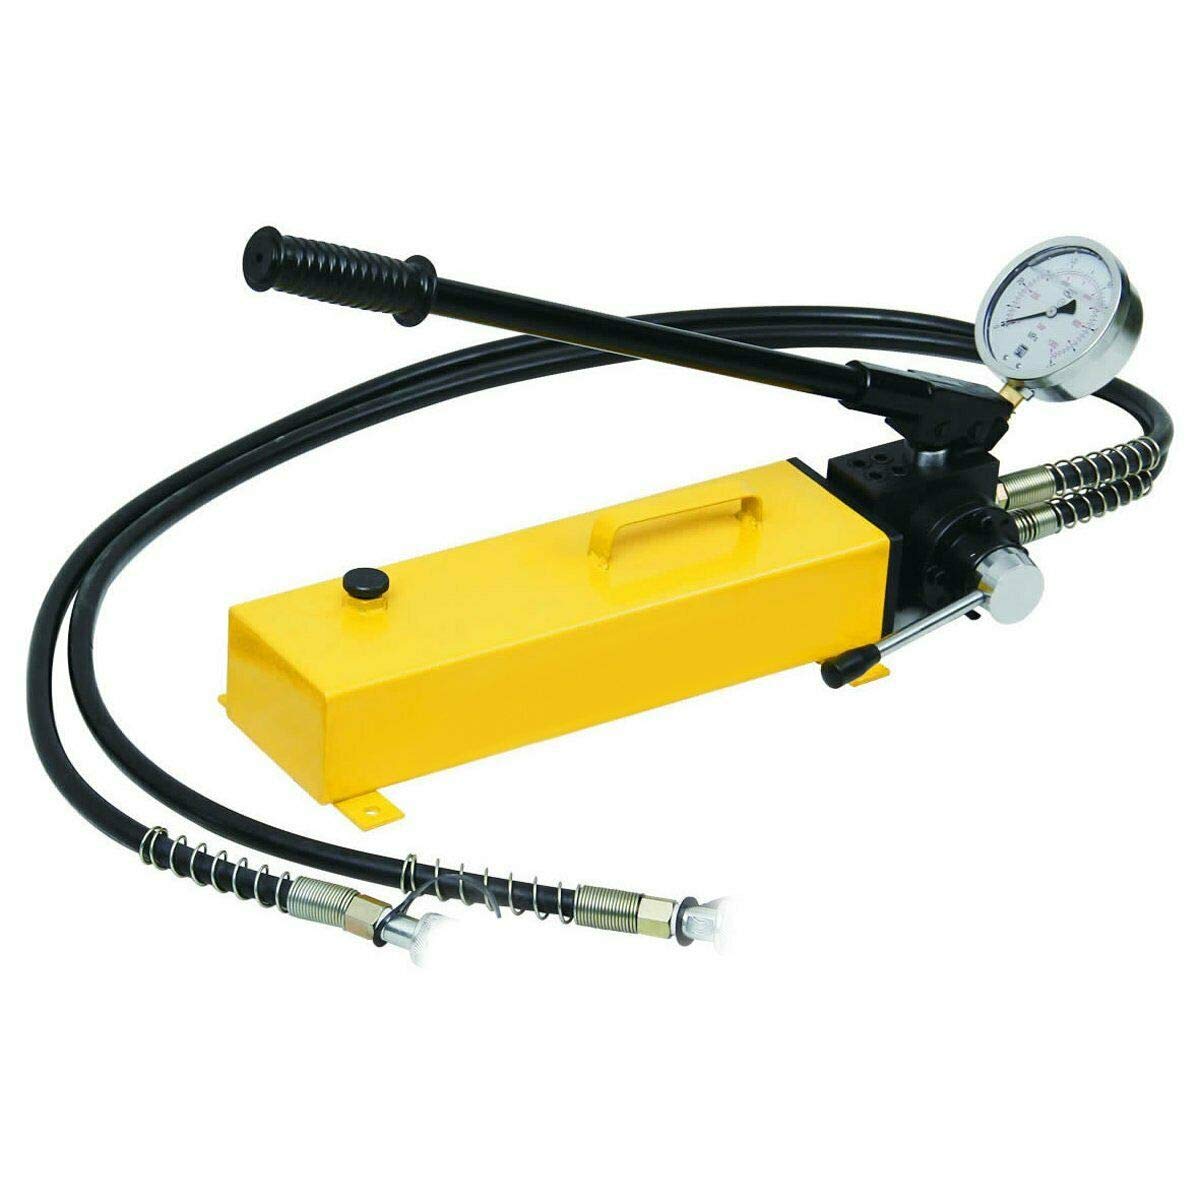 CP-700AB Double Acting Hydraulic Hand Pump w/ Pressure Gauge